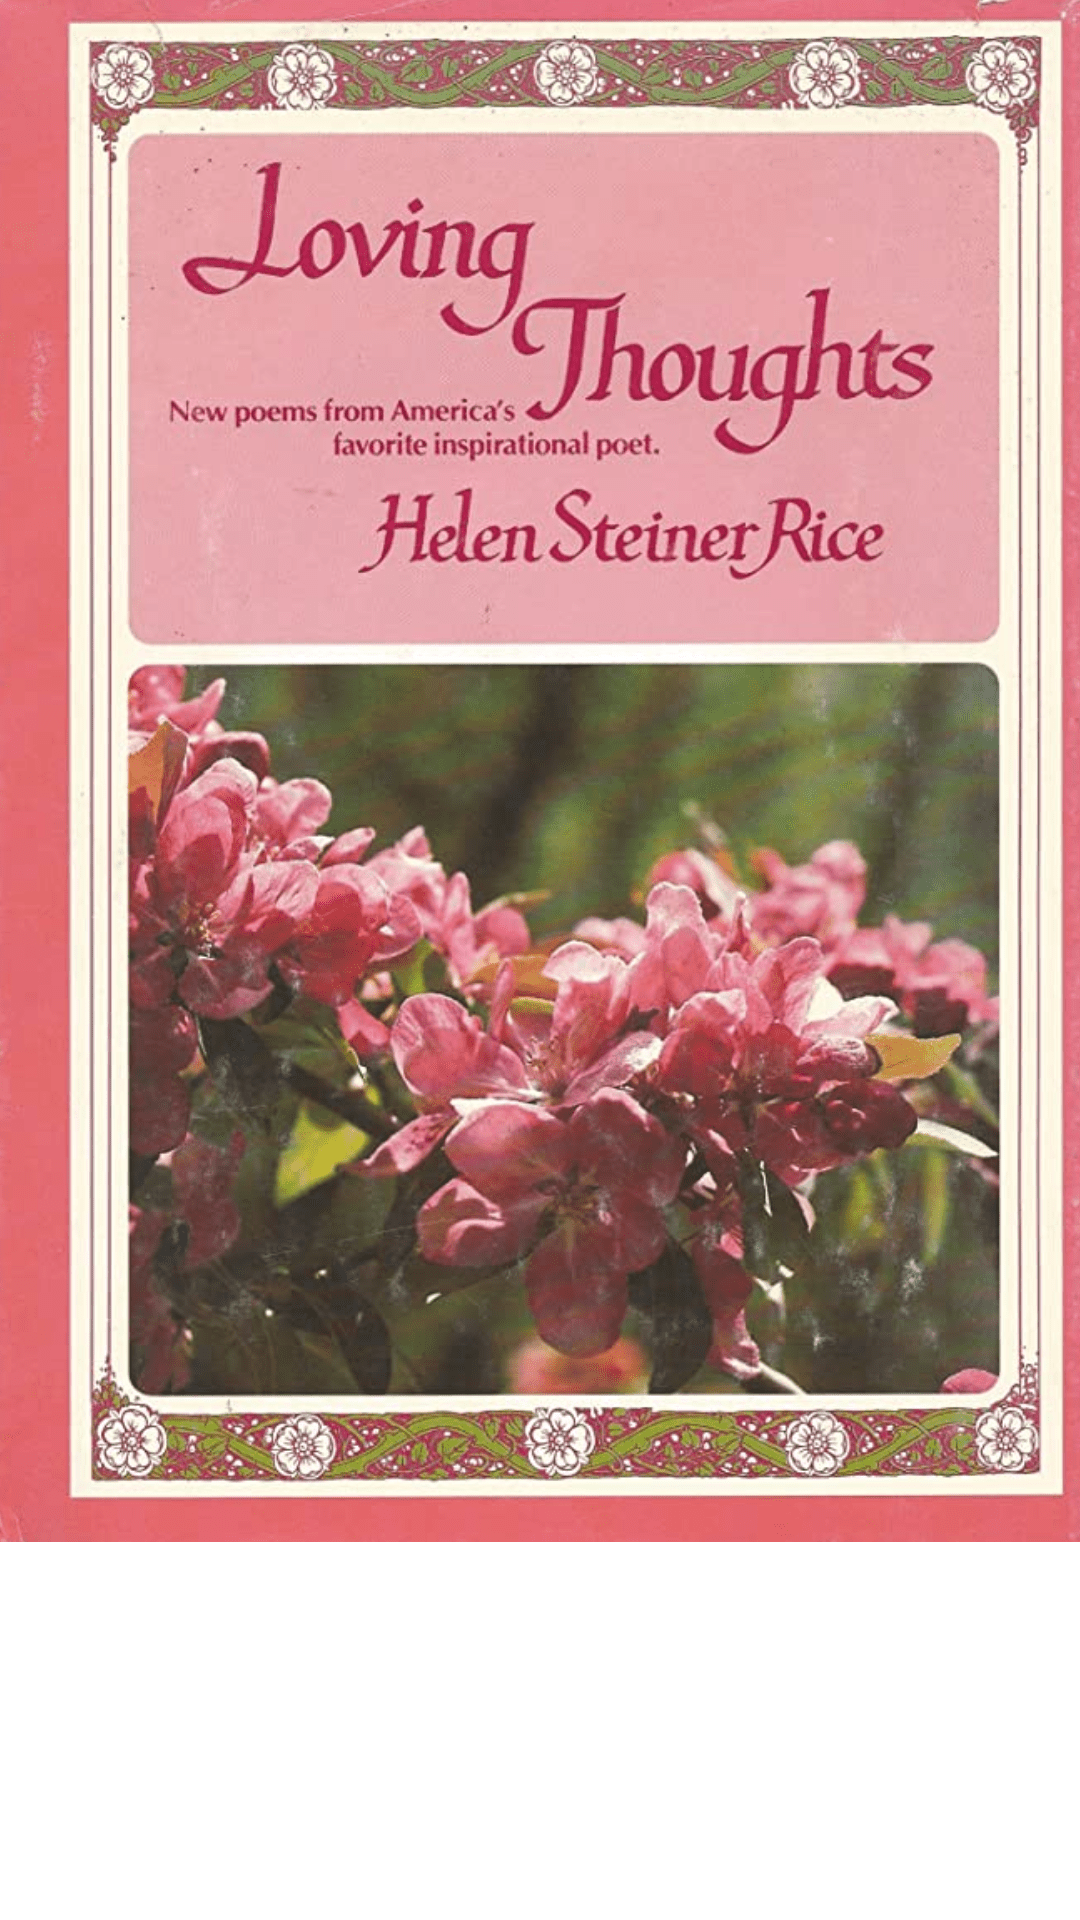 Loving Thoughts by Helen Steiner Rice